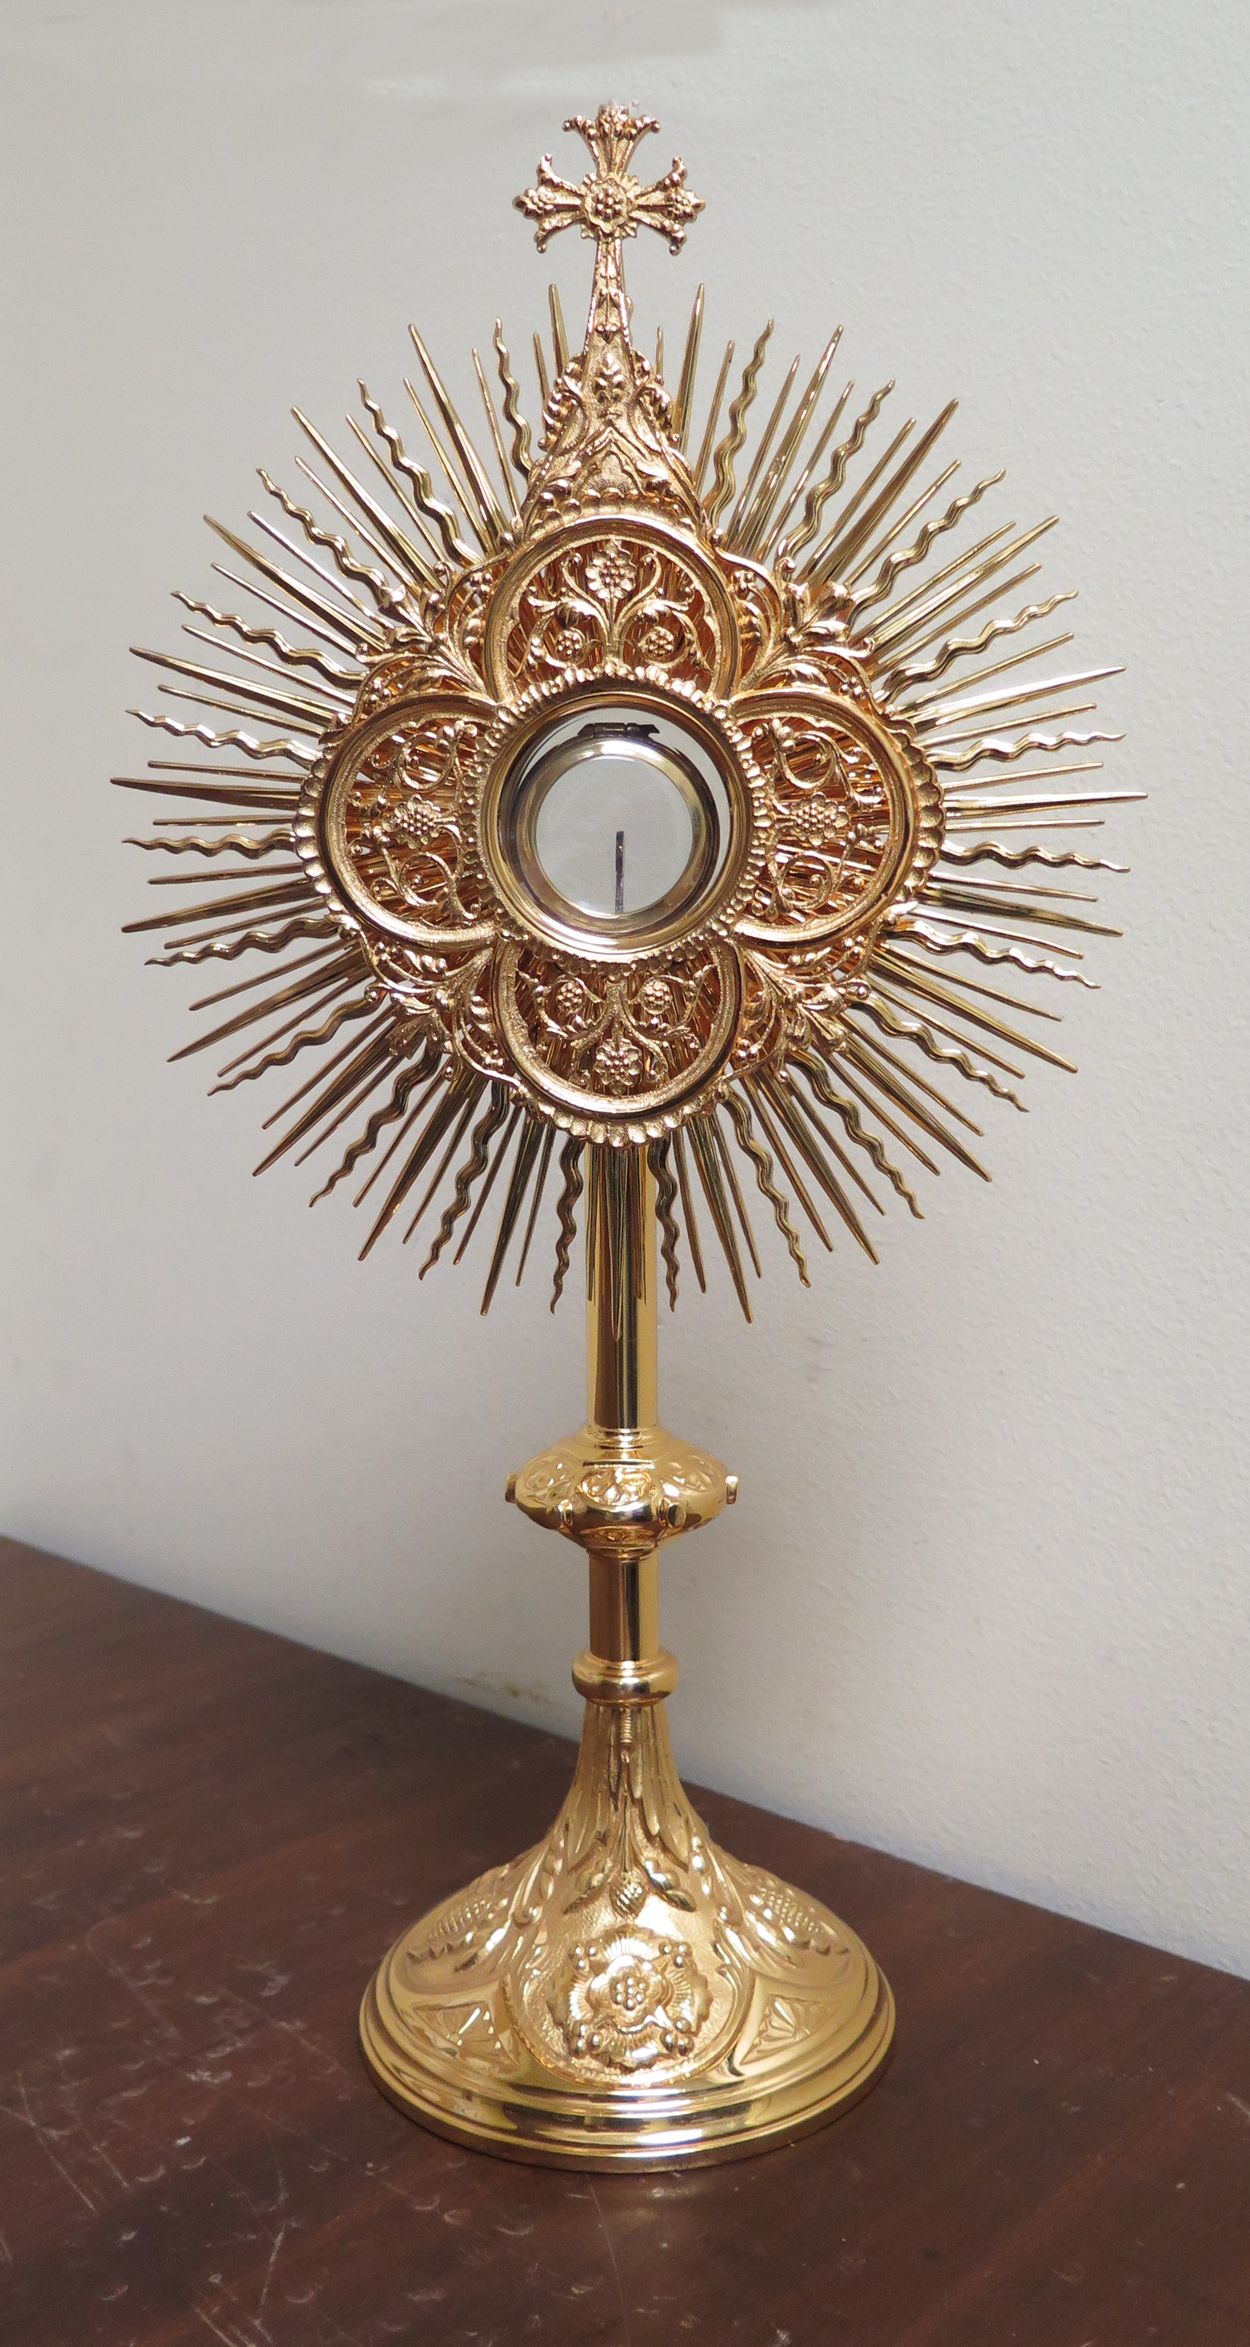 St. Faustina and the Eucharist - The Catholic Messenger